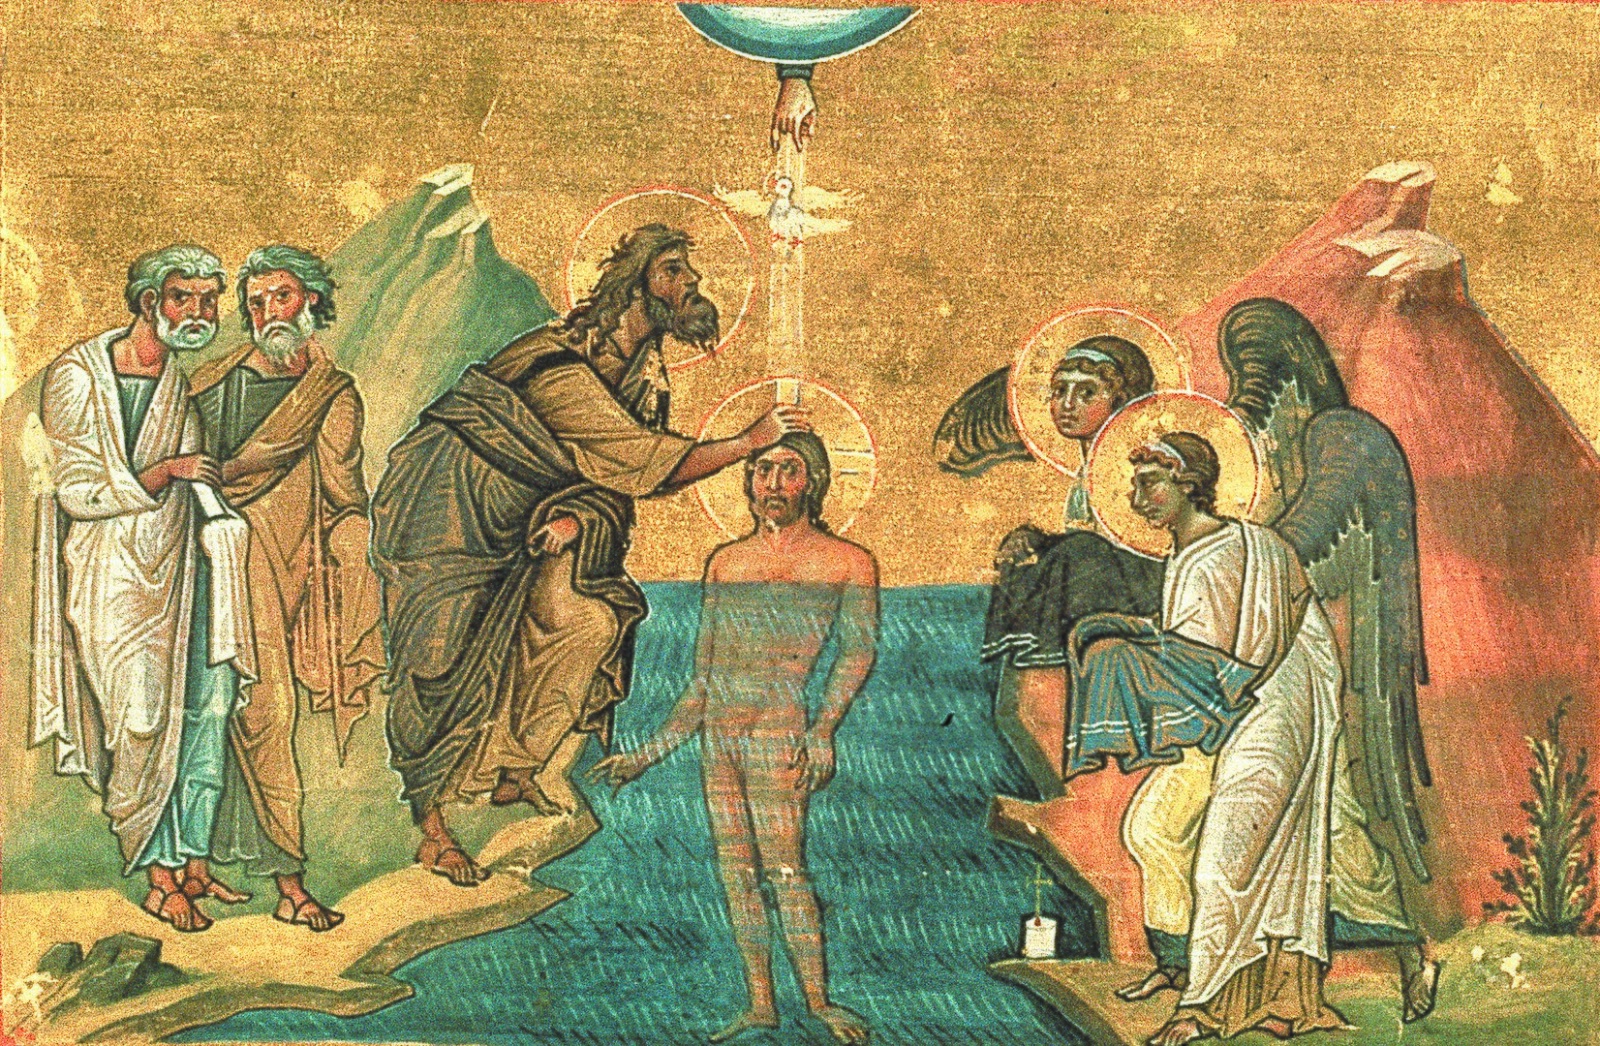 The Baptism of Jesus by John the Baptist - Menologe of Basil II (late 10th century)